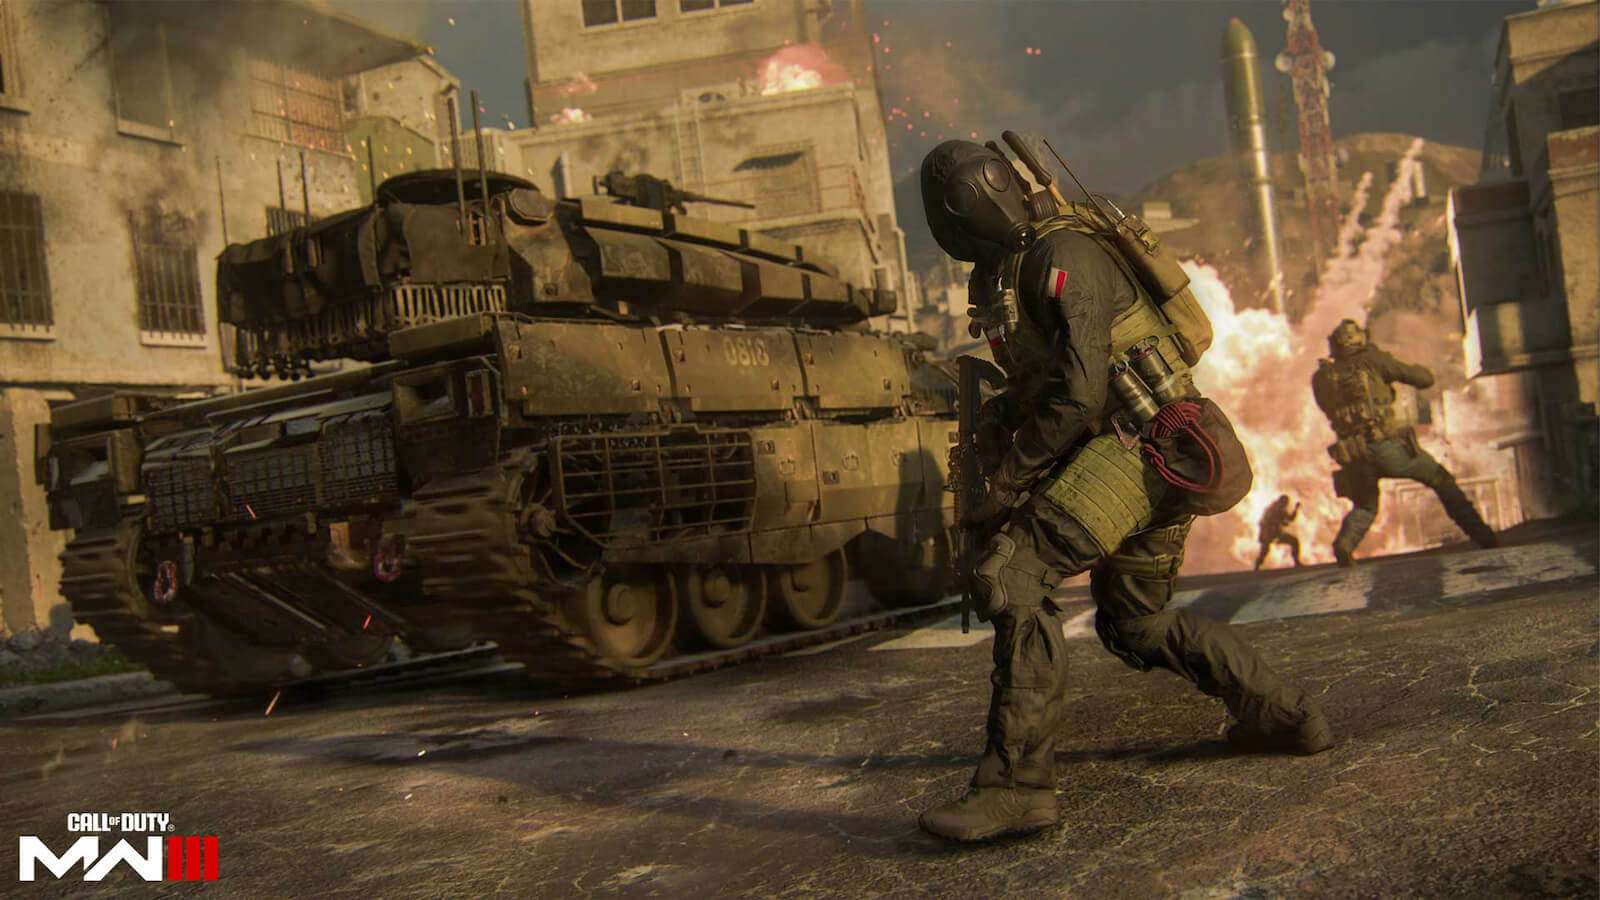 MW3 players divided over "recycled calling card art" in Jet bundle